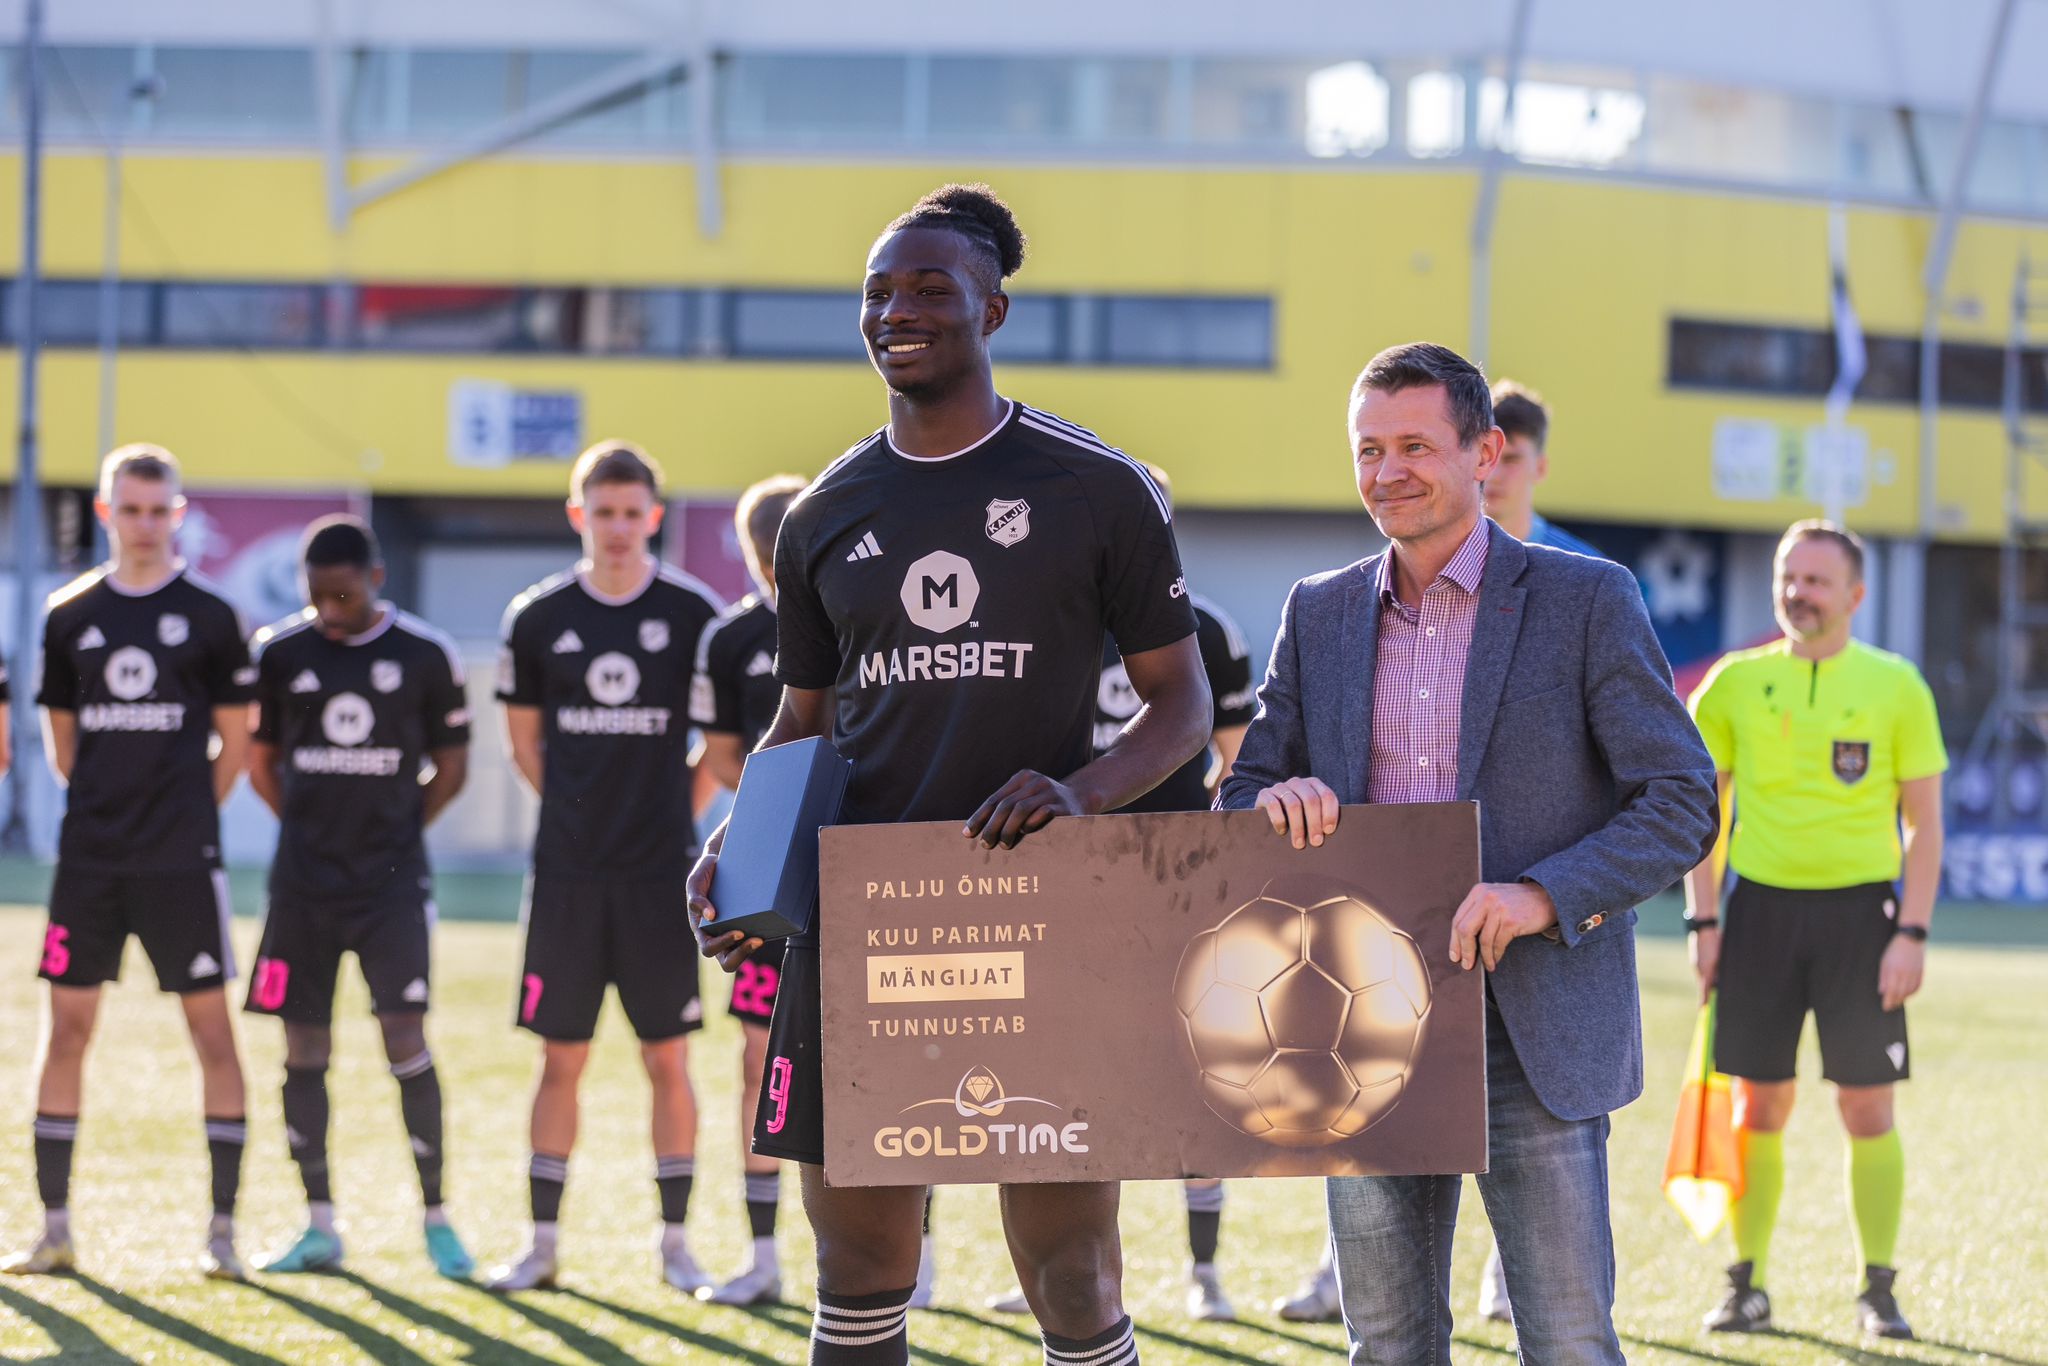 U23 Star Promise David Gets Award Plaque and Cash Reward for Player of the Month Feat